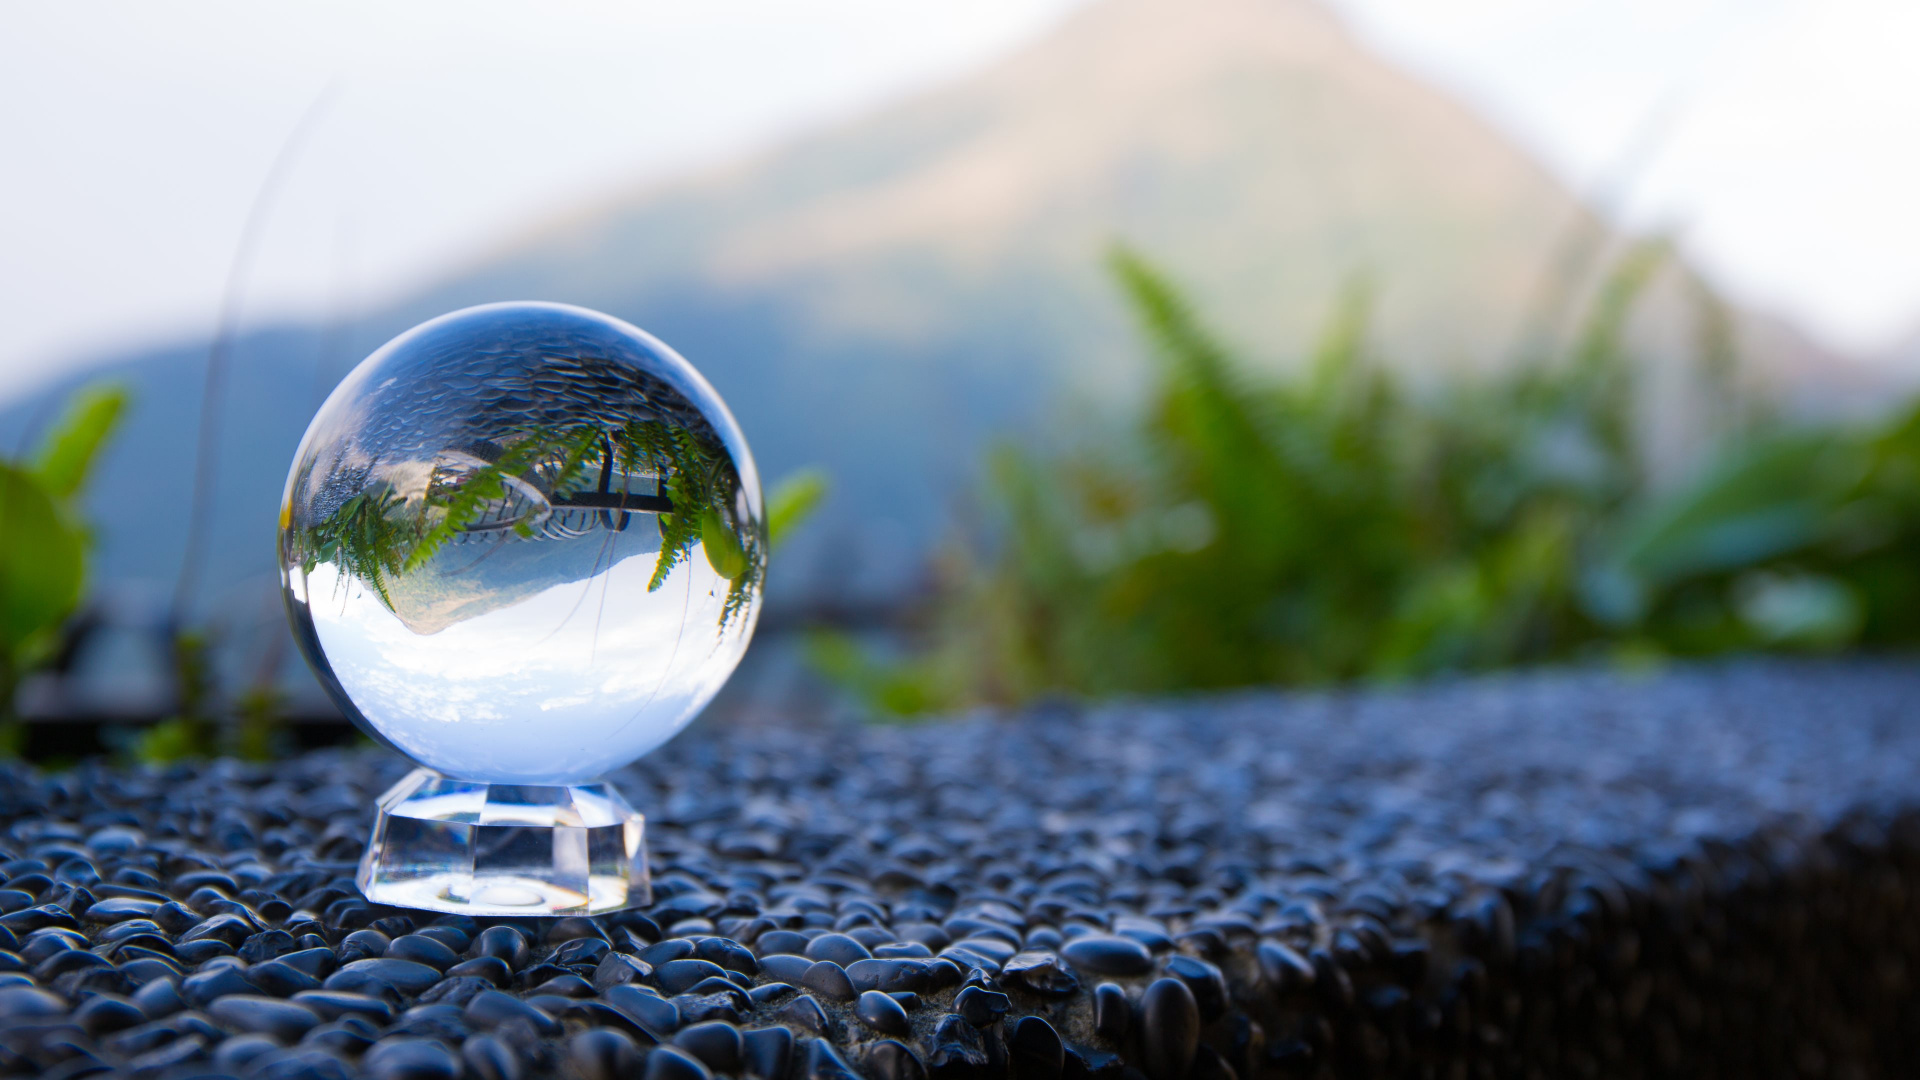 Clear Glass Ball on Black and White Stone. Wallpaper in 1920x1080 Resolution